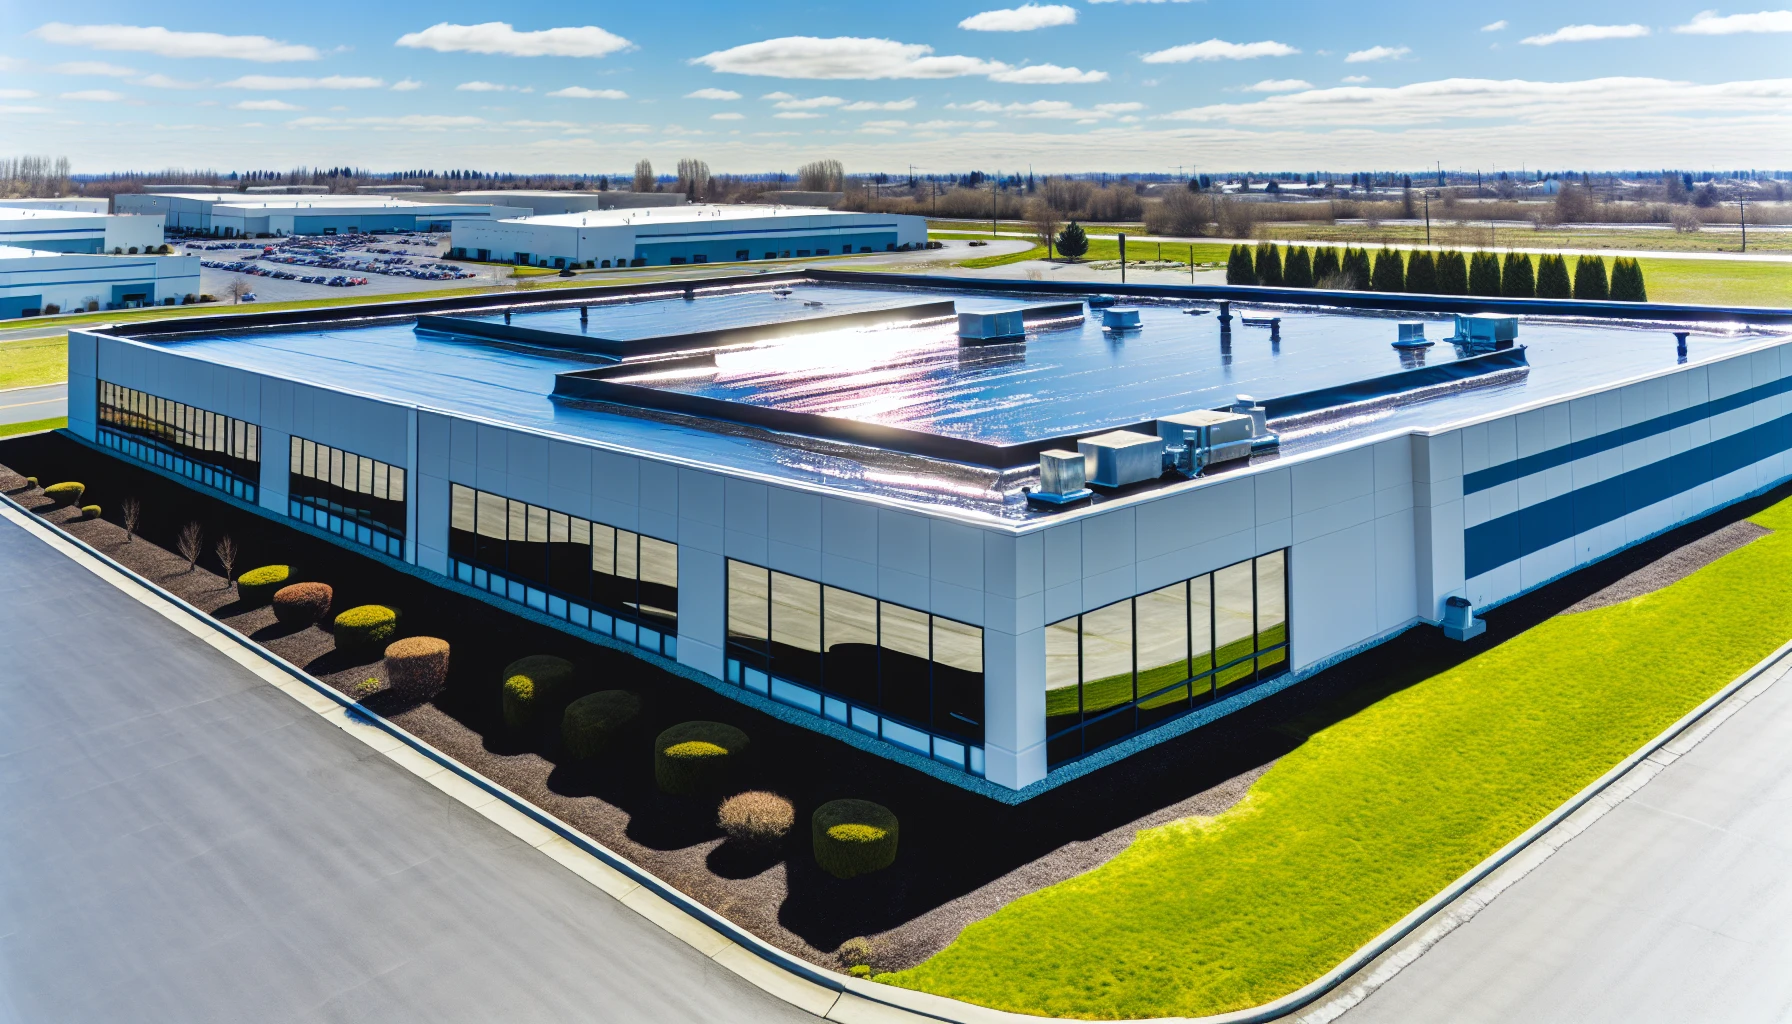 A Commercial Building With A Newly Coated Roof, Showcasing The Benefits Of Roof Coatings In Extending Roof Life And Protecting Against Damaging Elements.